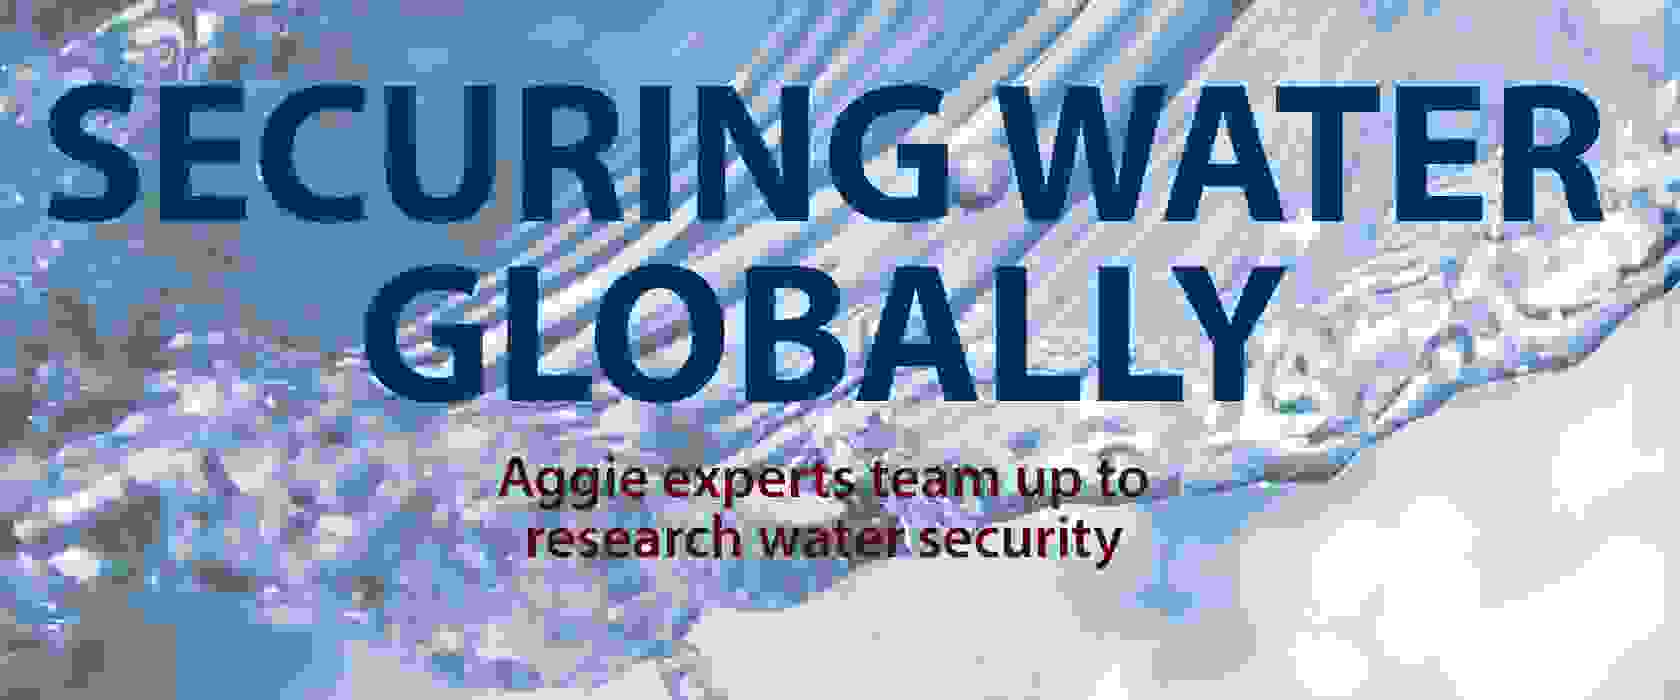 Securing water globally